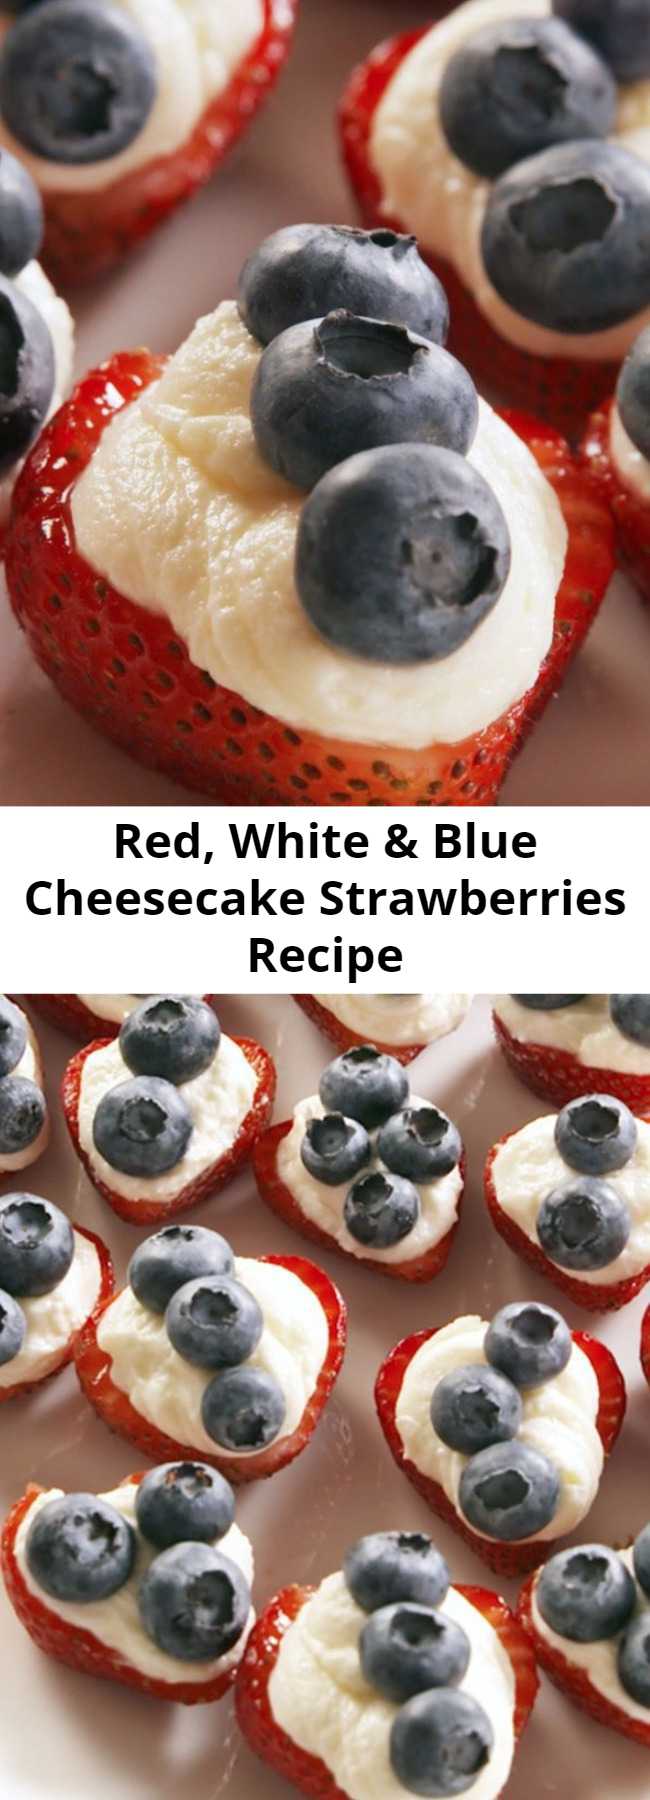 Red, White & Blue Cheesecake Strawberries Recipe - When you're looking for an easy July 4th dessert, look no further than these adorable — and, ugh, so addictive — red, white, and blue strawberries. The slightly sweet cheesecake filling is the perfect complement to the berries. They might be better than watching the fireworks.